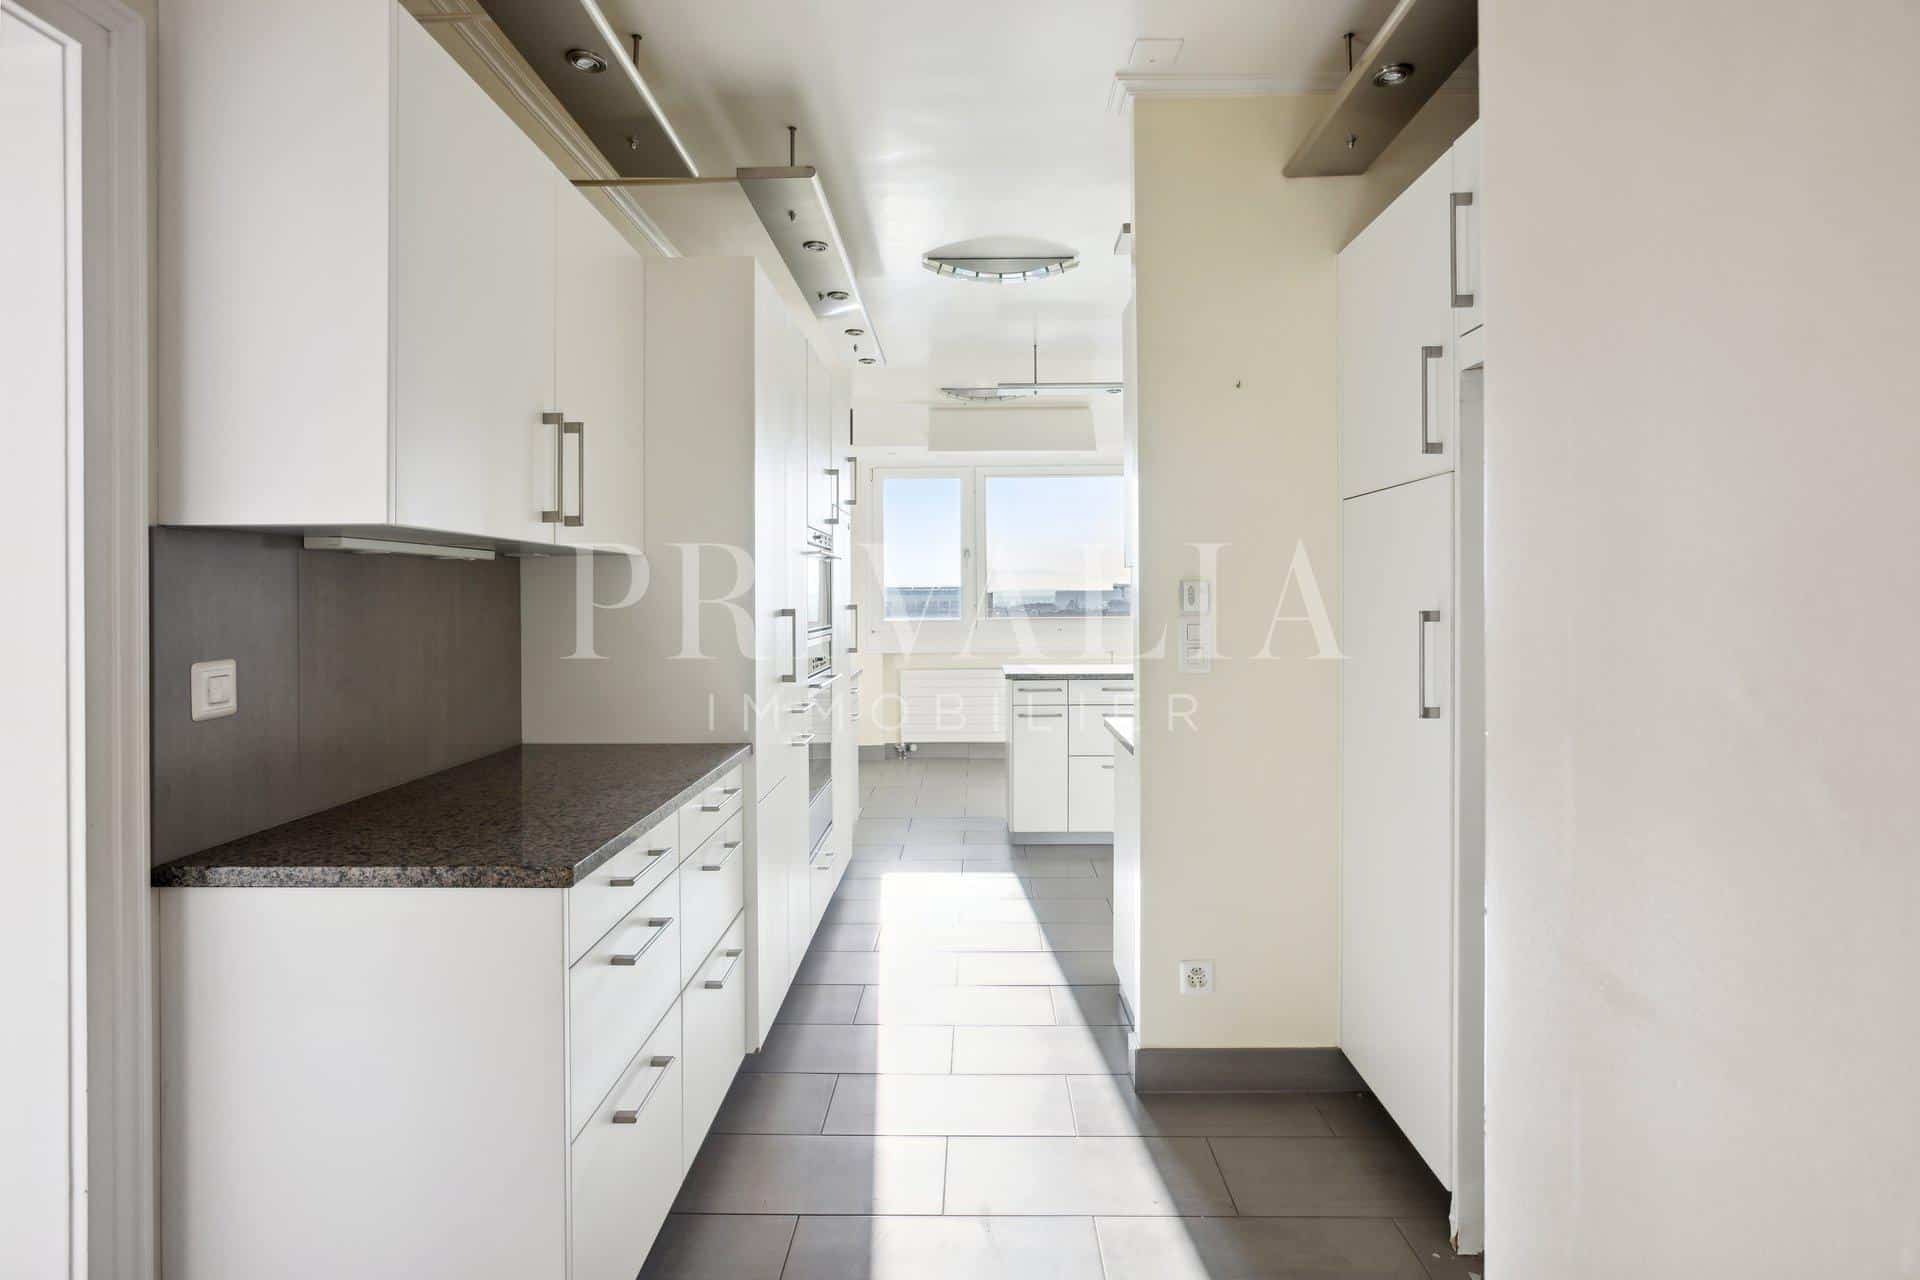 PrivaliaEXCLUSIVE: Apartment near International Organizations with Panoramic View